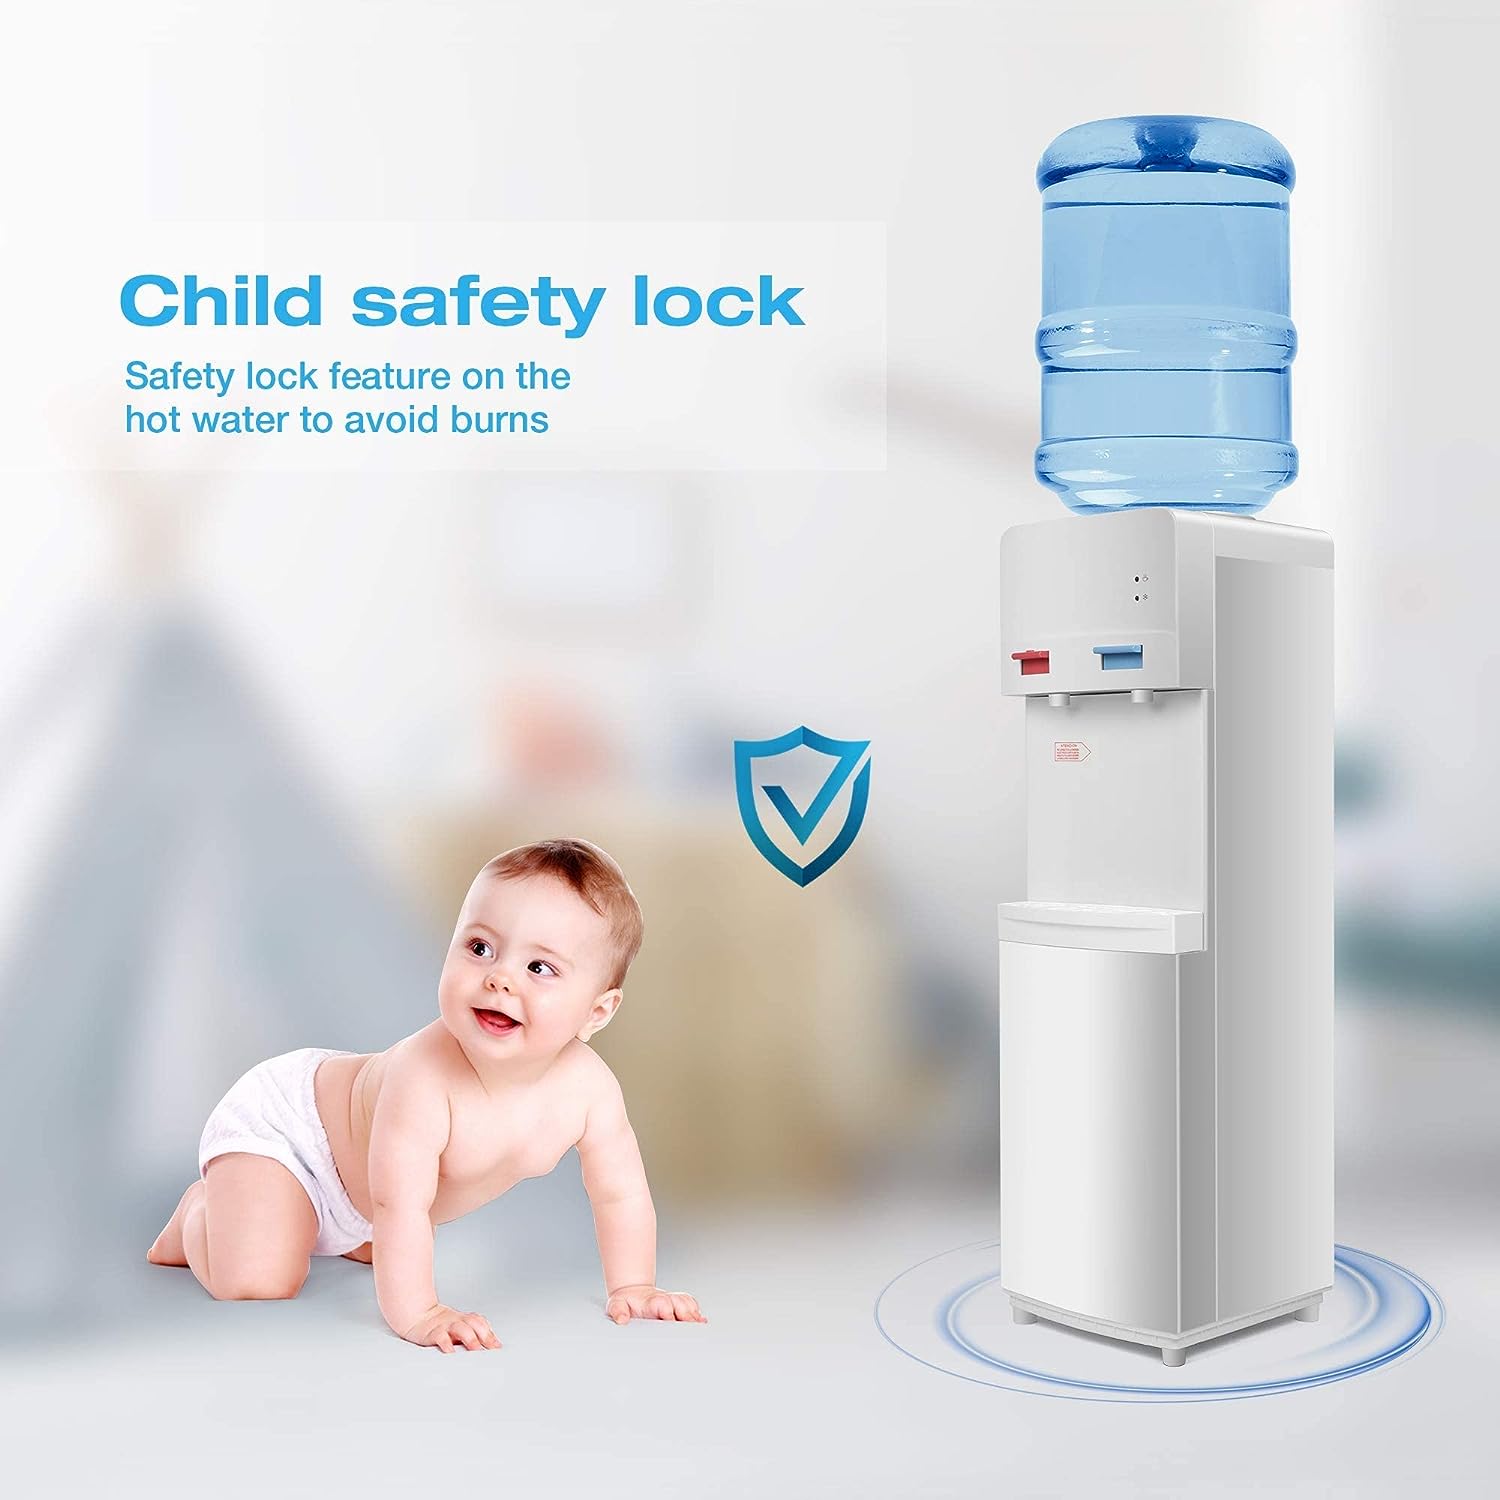 5 Gallons Hot and Cold Top Loading Water Cooler Dispenser with Child Safety Lock, White